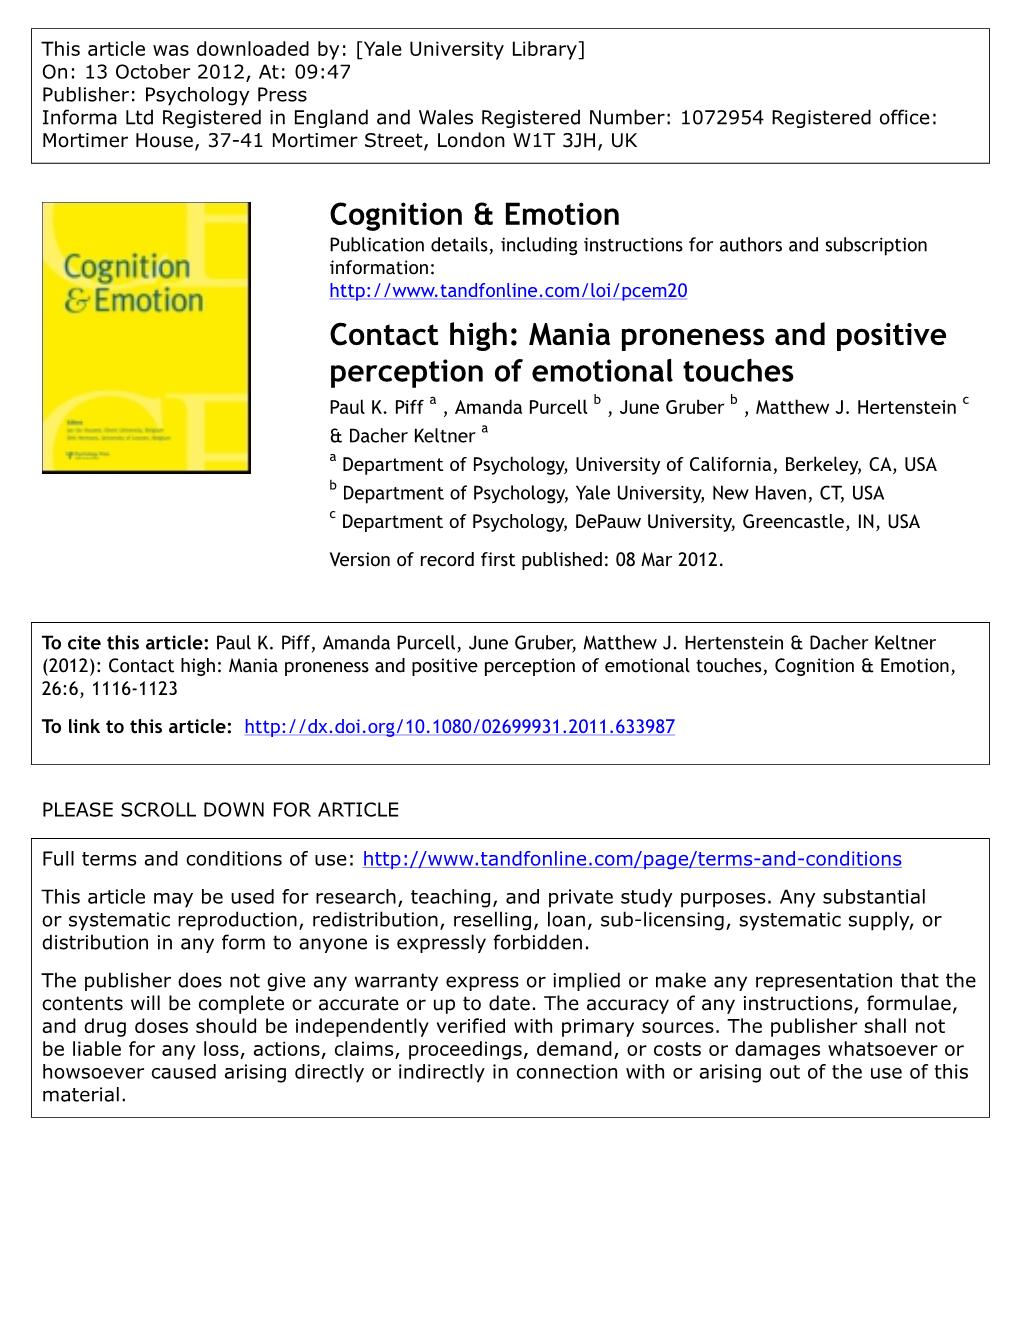 Contact High: Mania Proneness and Positive Perception of Emotional Touches Paul K